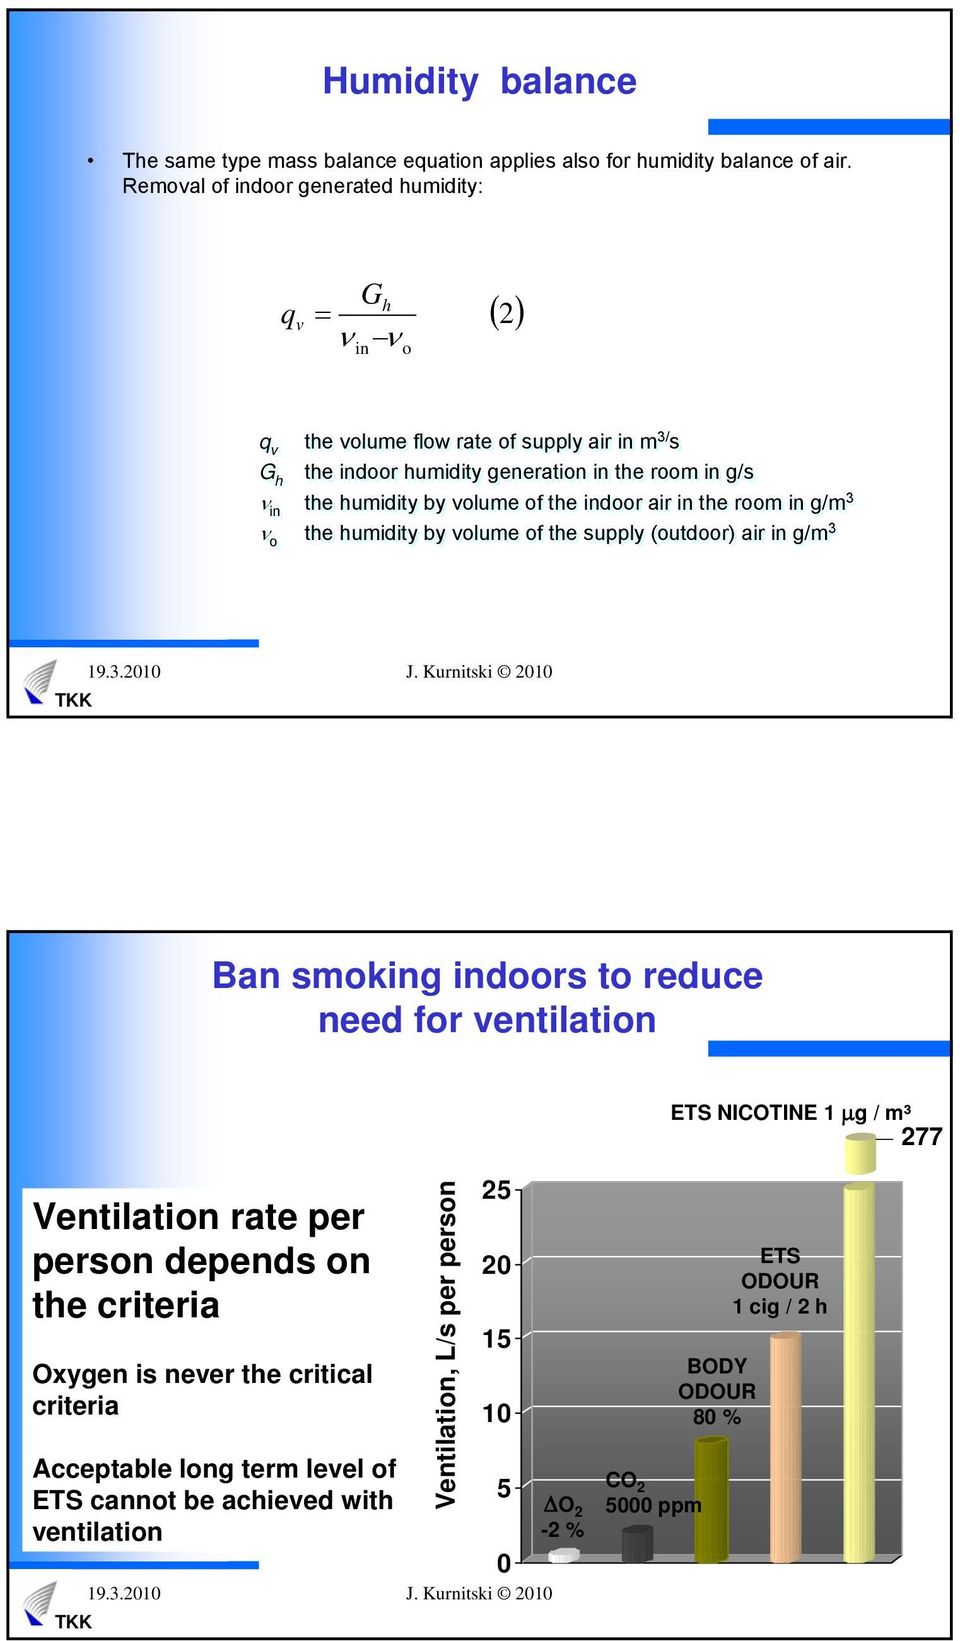 volume of the indoor air in the room in g/m 3 o the humidity by volume of the supply (outdoor) air in g/m 3 Ban smoking indoors to reduce need for ventilation Ventilation rate per